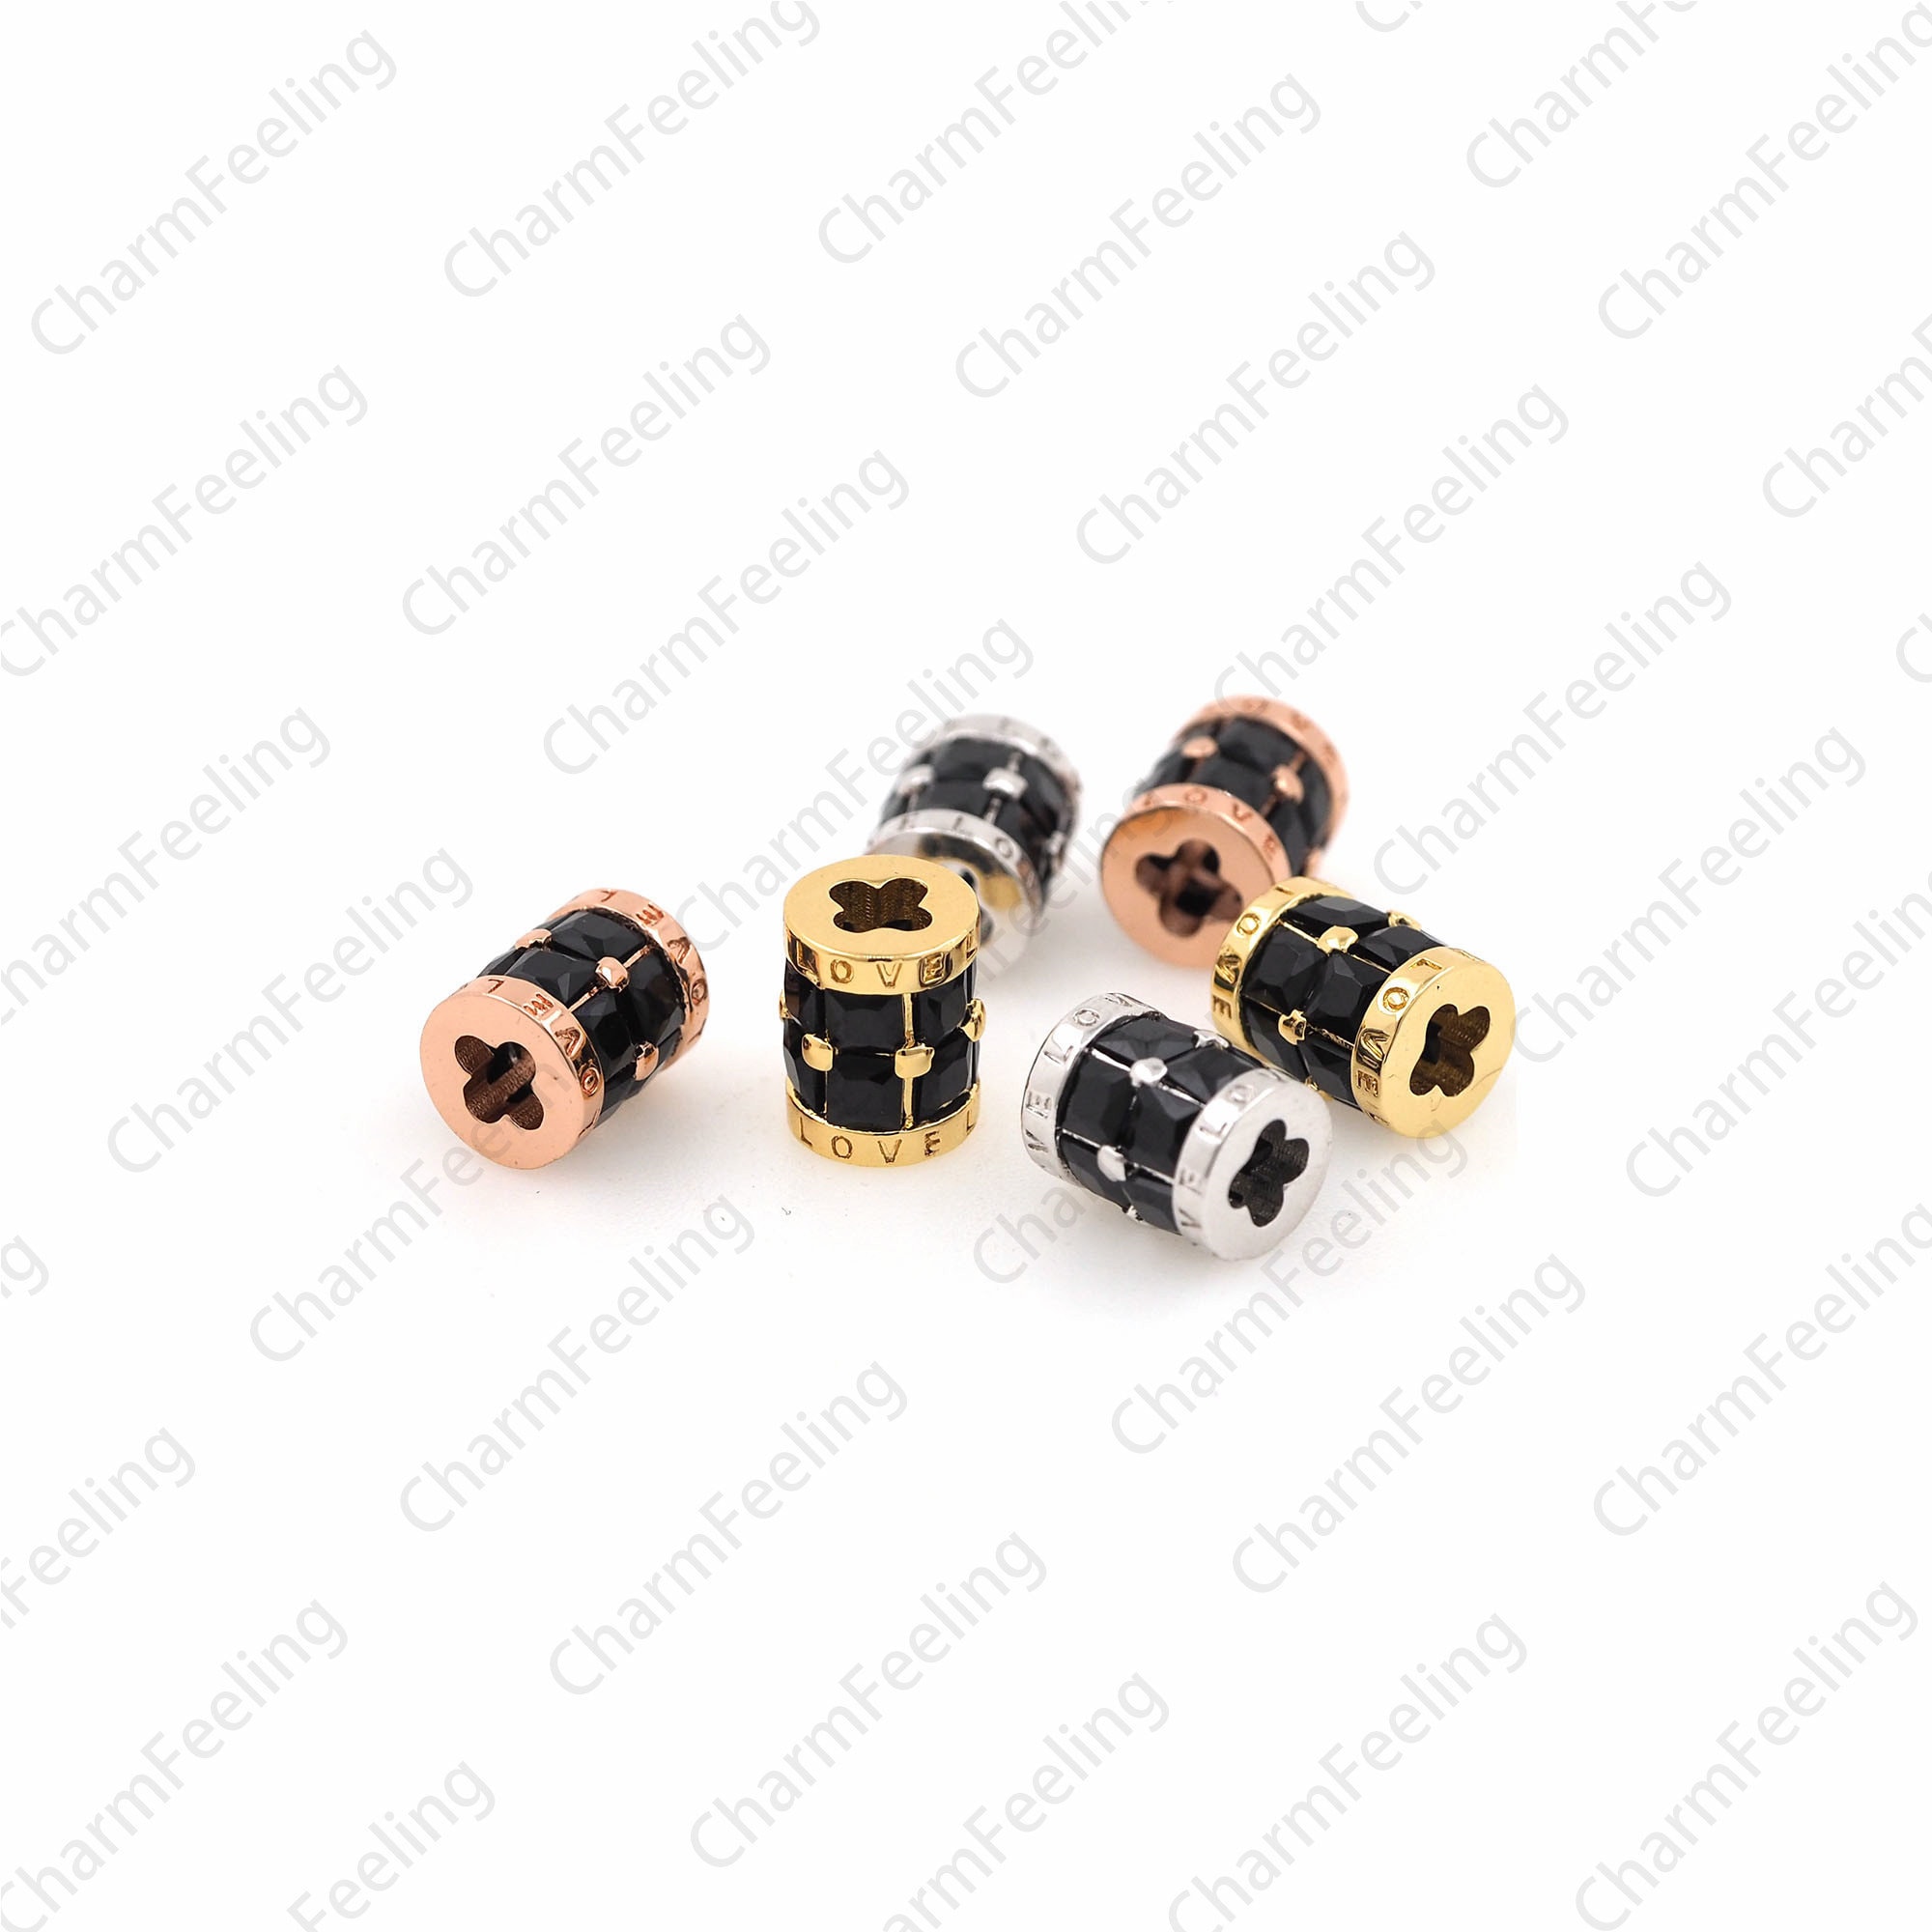 Cz Bucket Bead-Shaped Spacer Beads, String Bracelet Necklace Jewelry Beads 8x6.5mm Hole 2.5mm 1Pcs